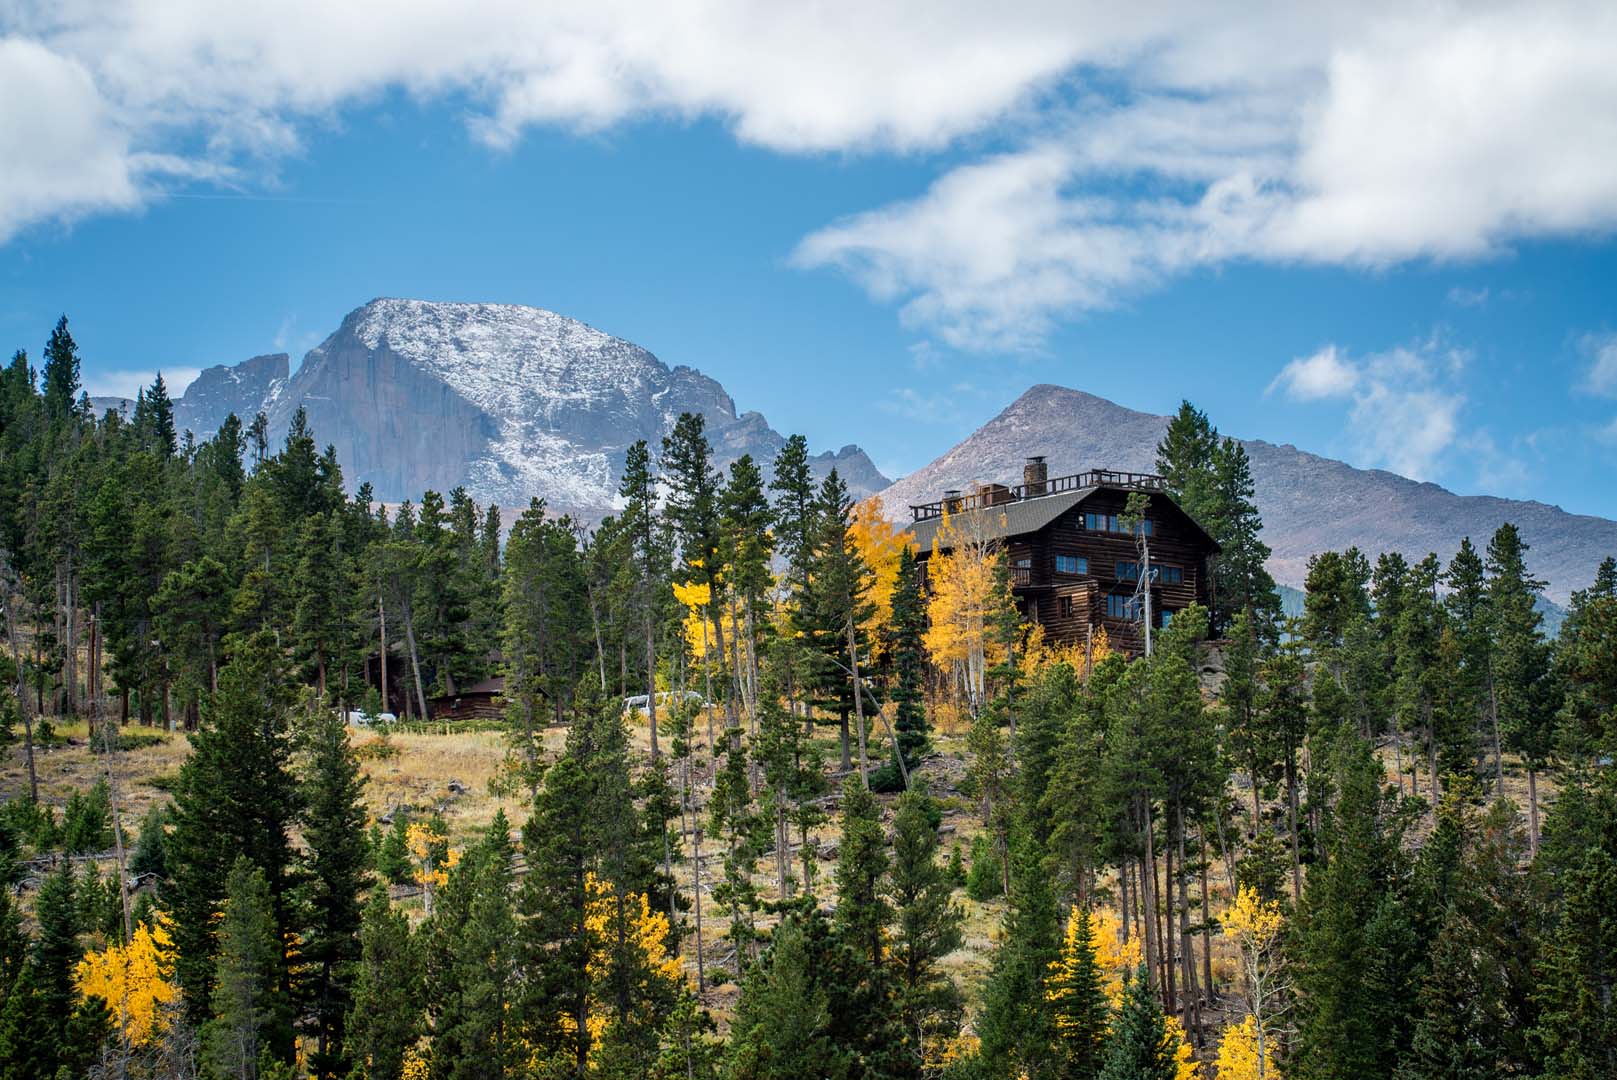 Landscape photo of mountains, trees and cabin